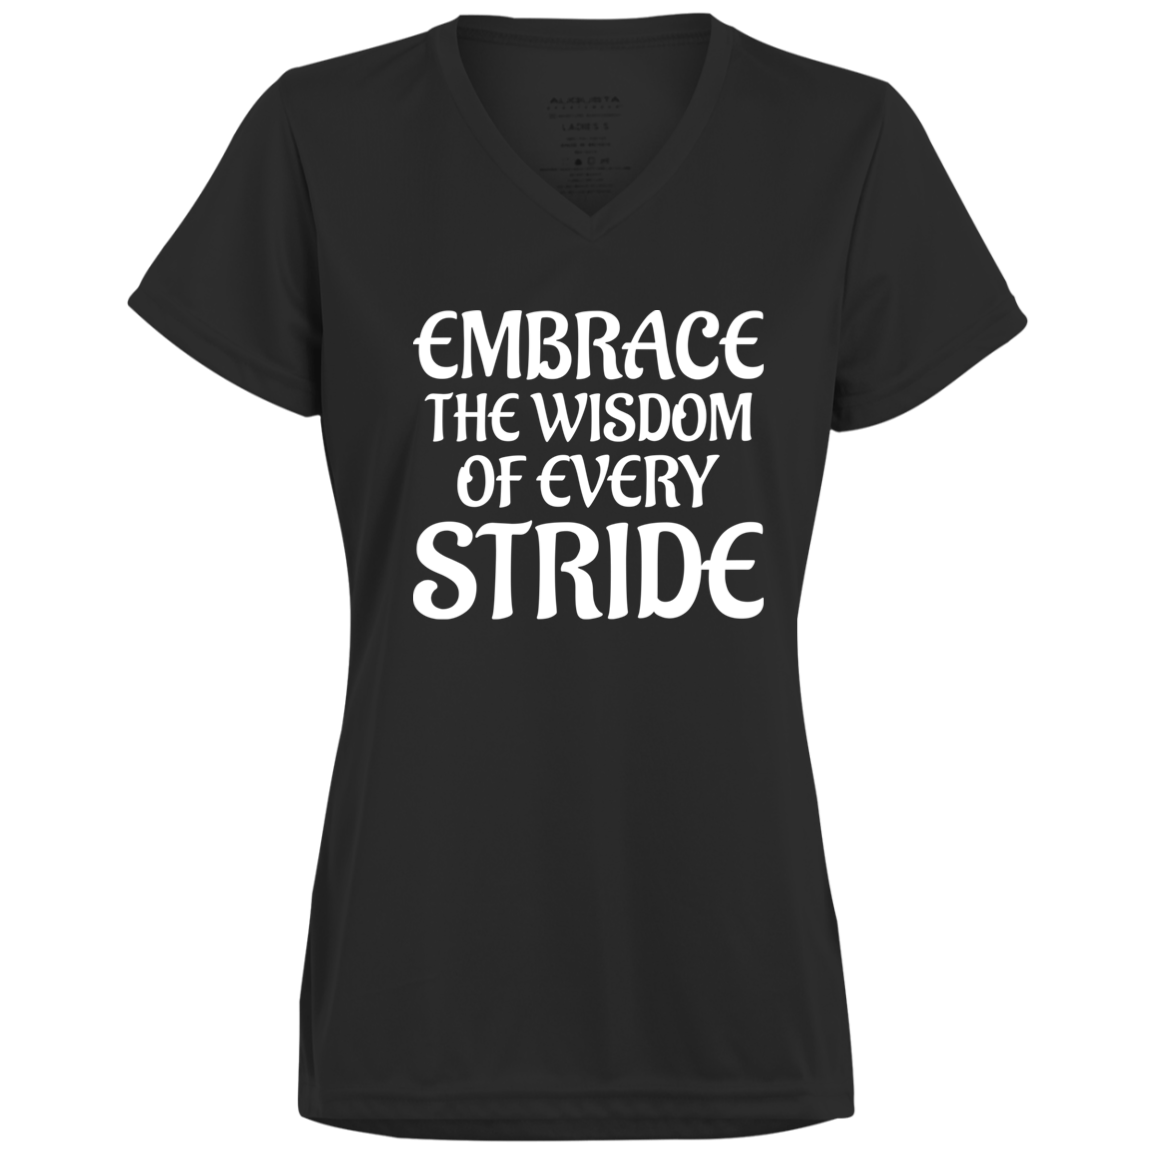 Women's Inspirational Top Embrace the wisdom of every stride